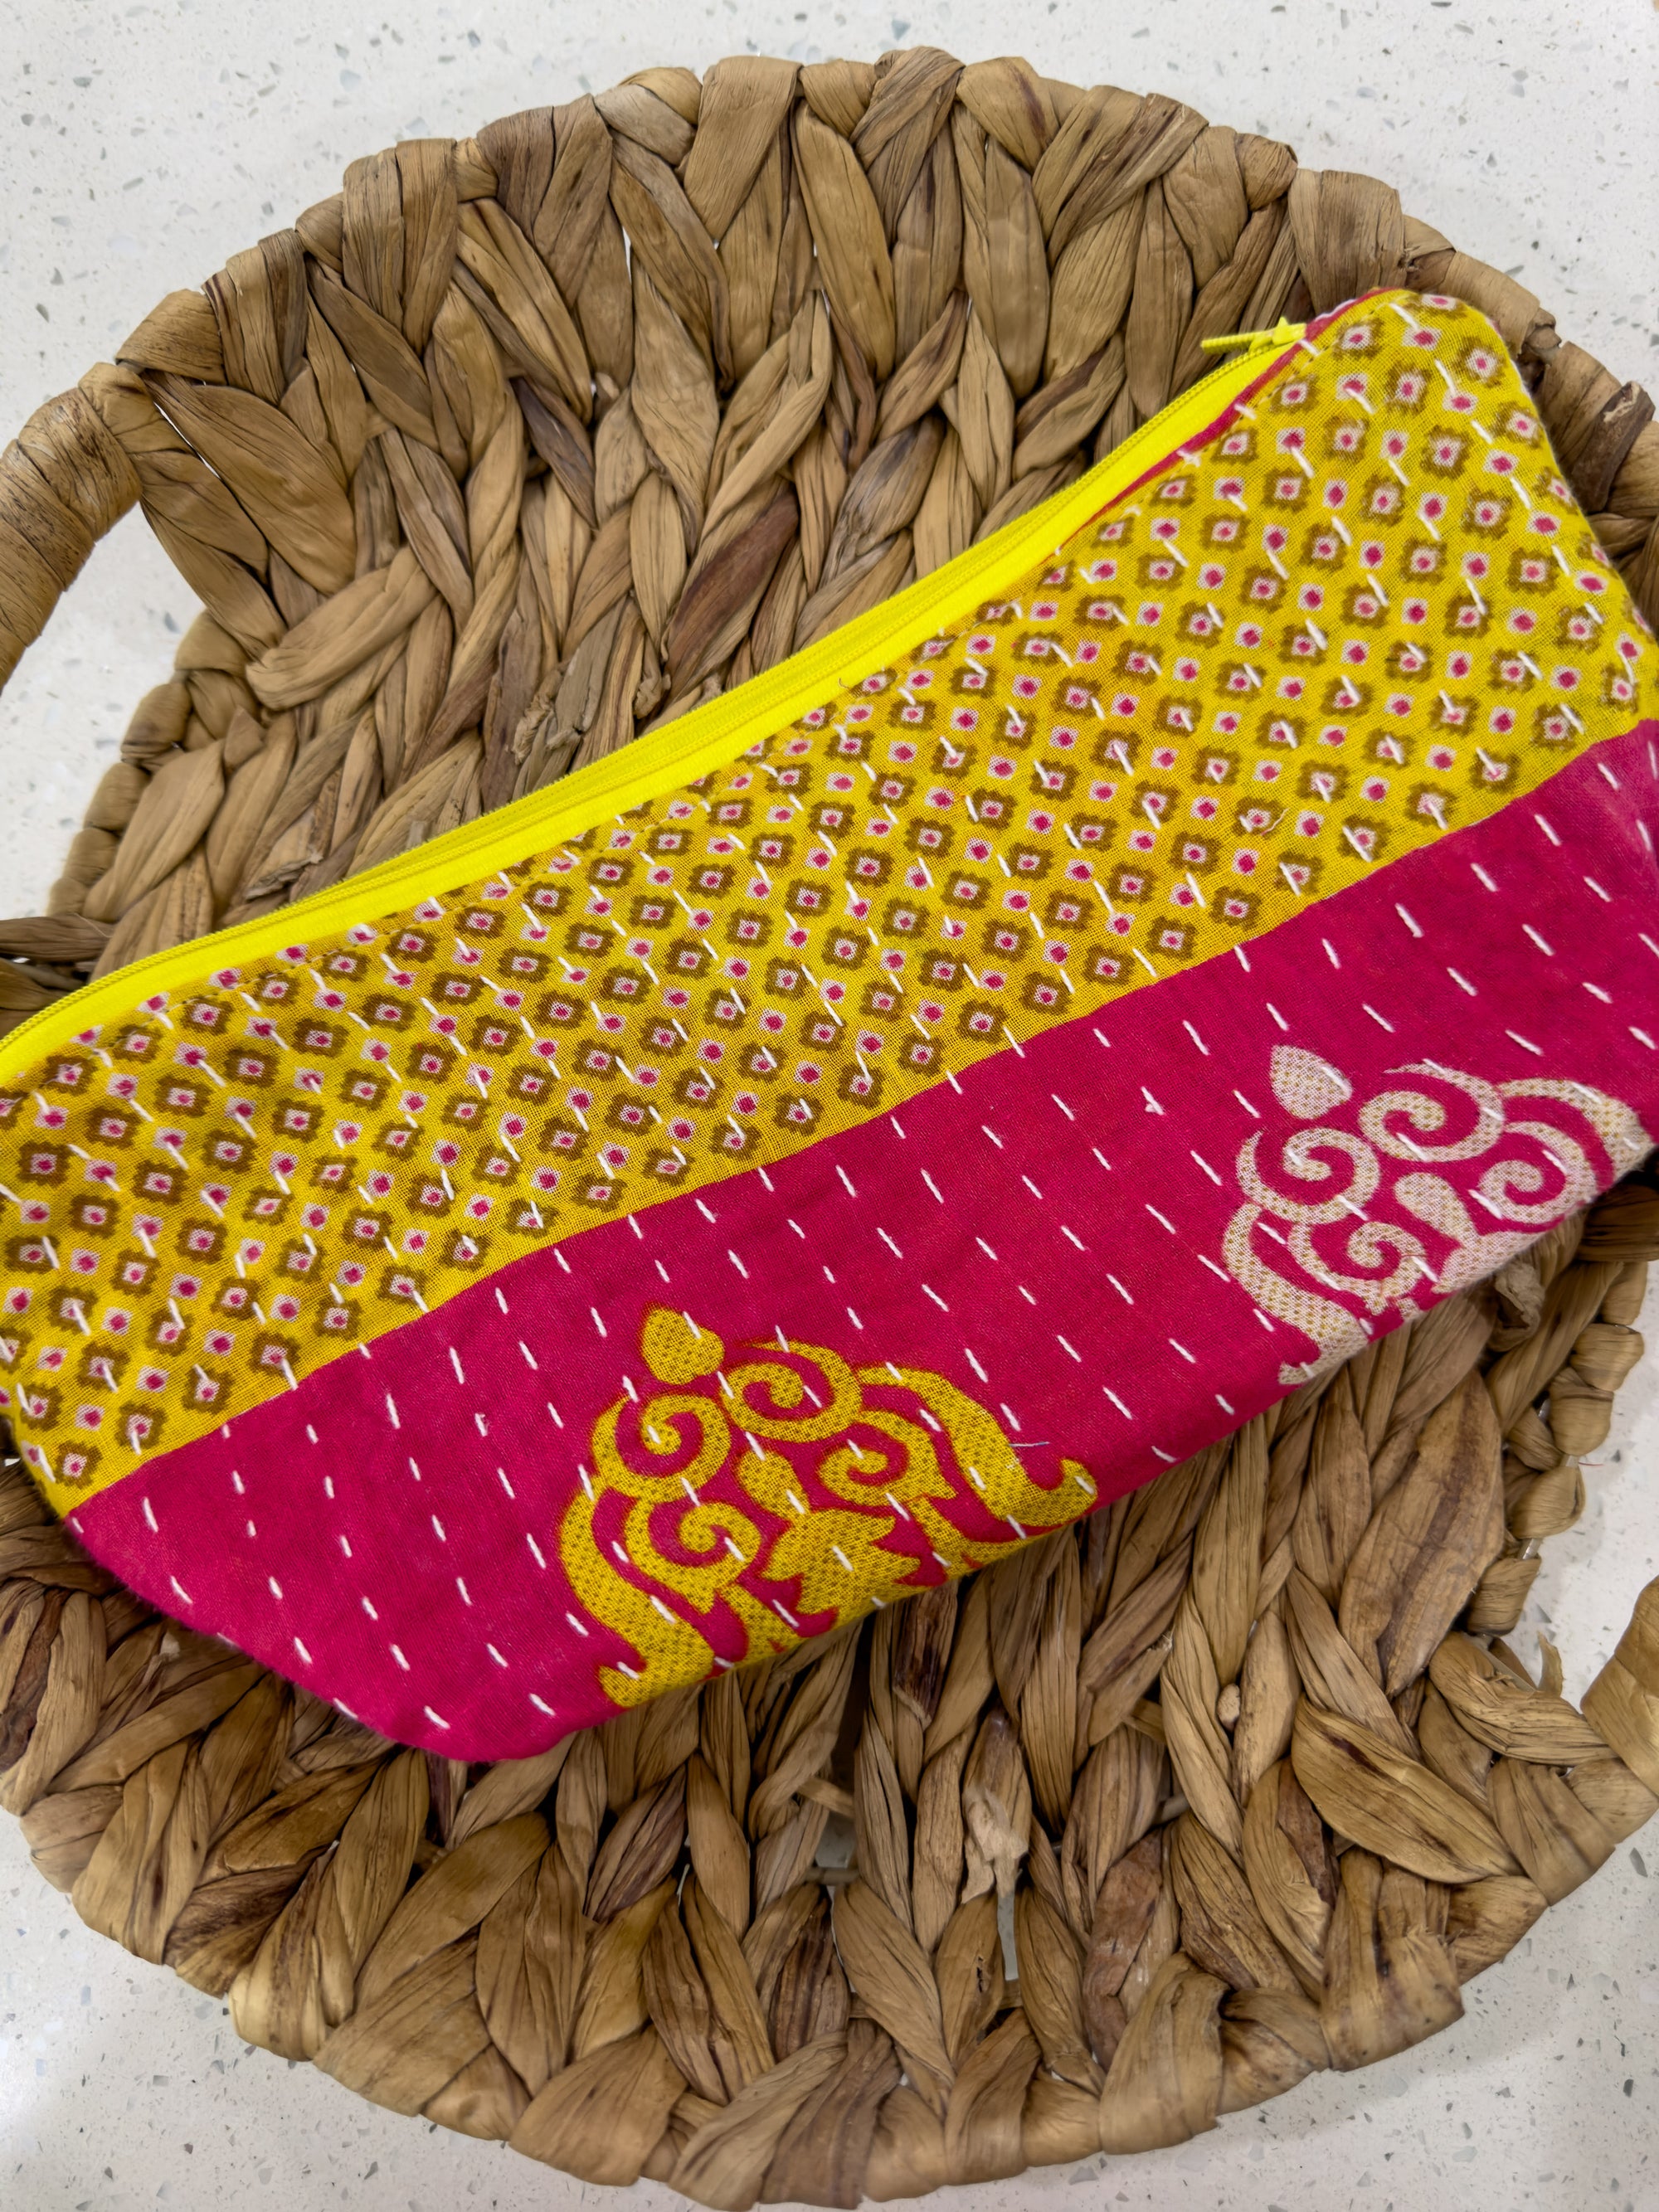 a yellow and pink bag sitting on top of a woven basket